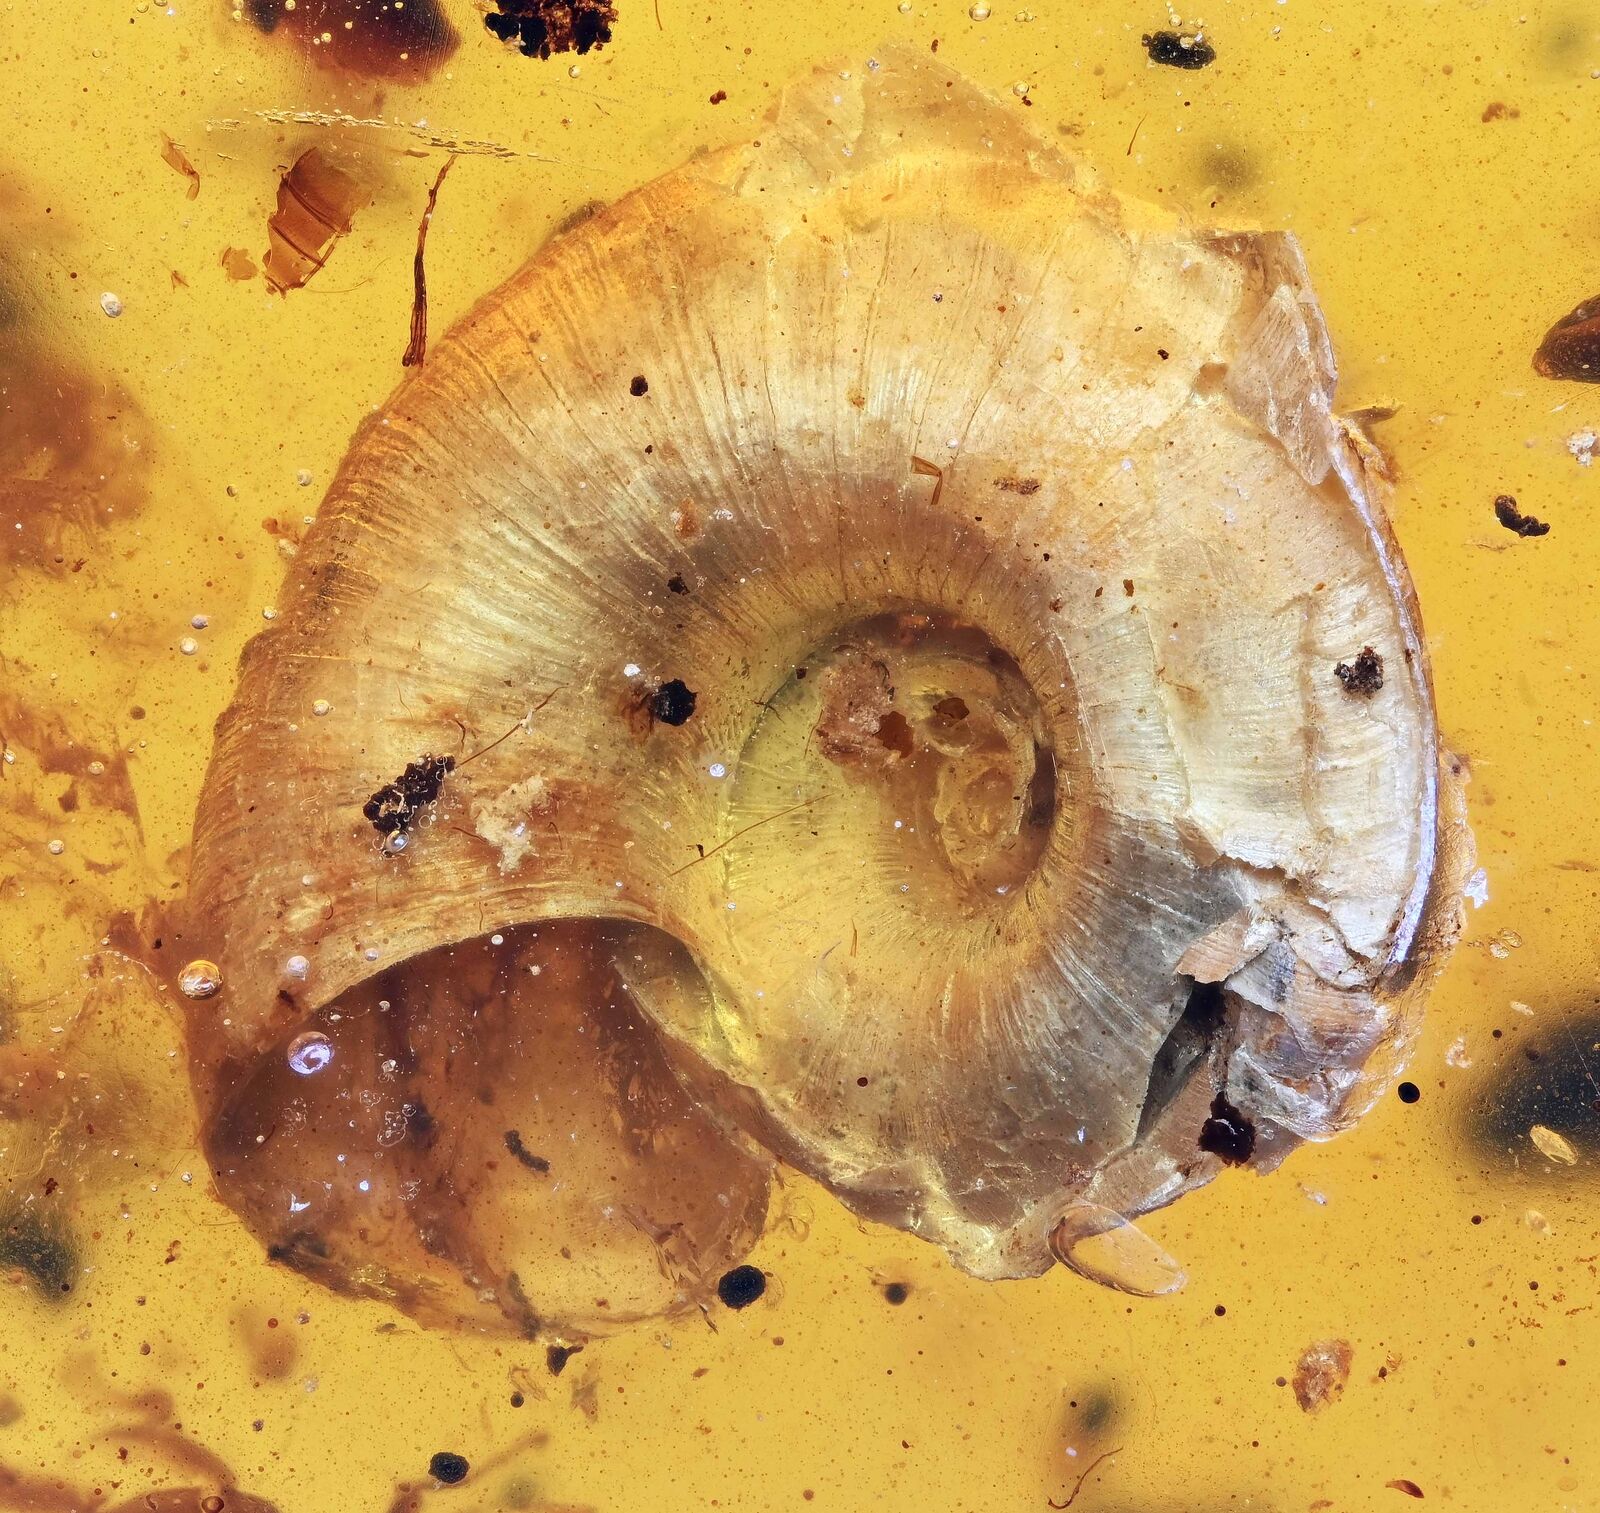 Rare Gastropoda (Land Snail), Fossil Inclusion in Burmese Amber